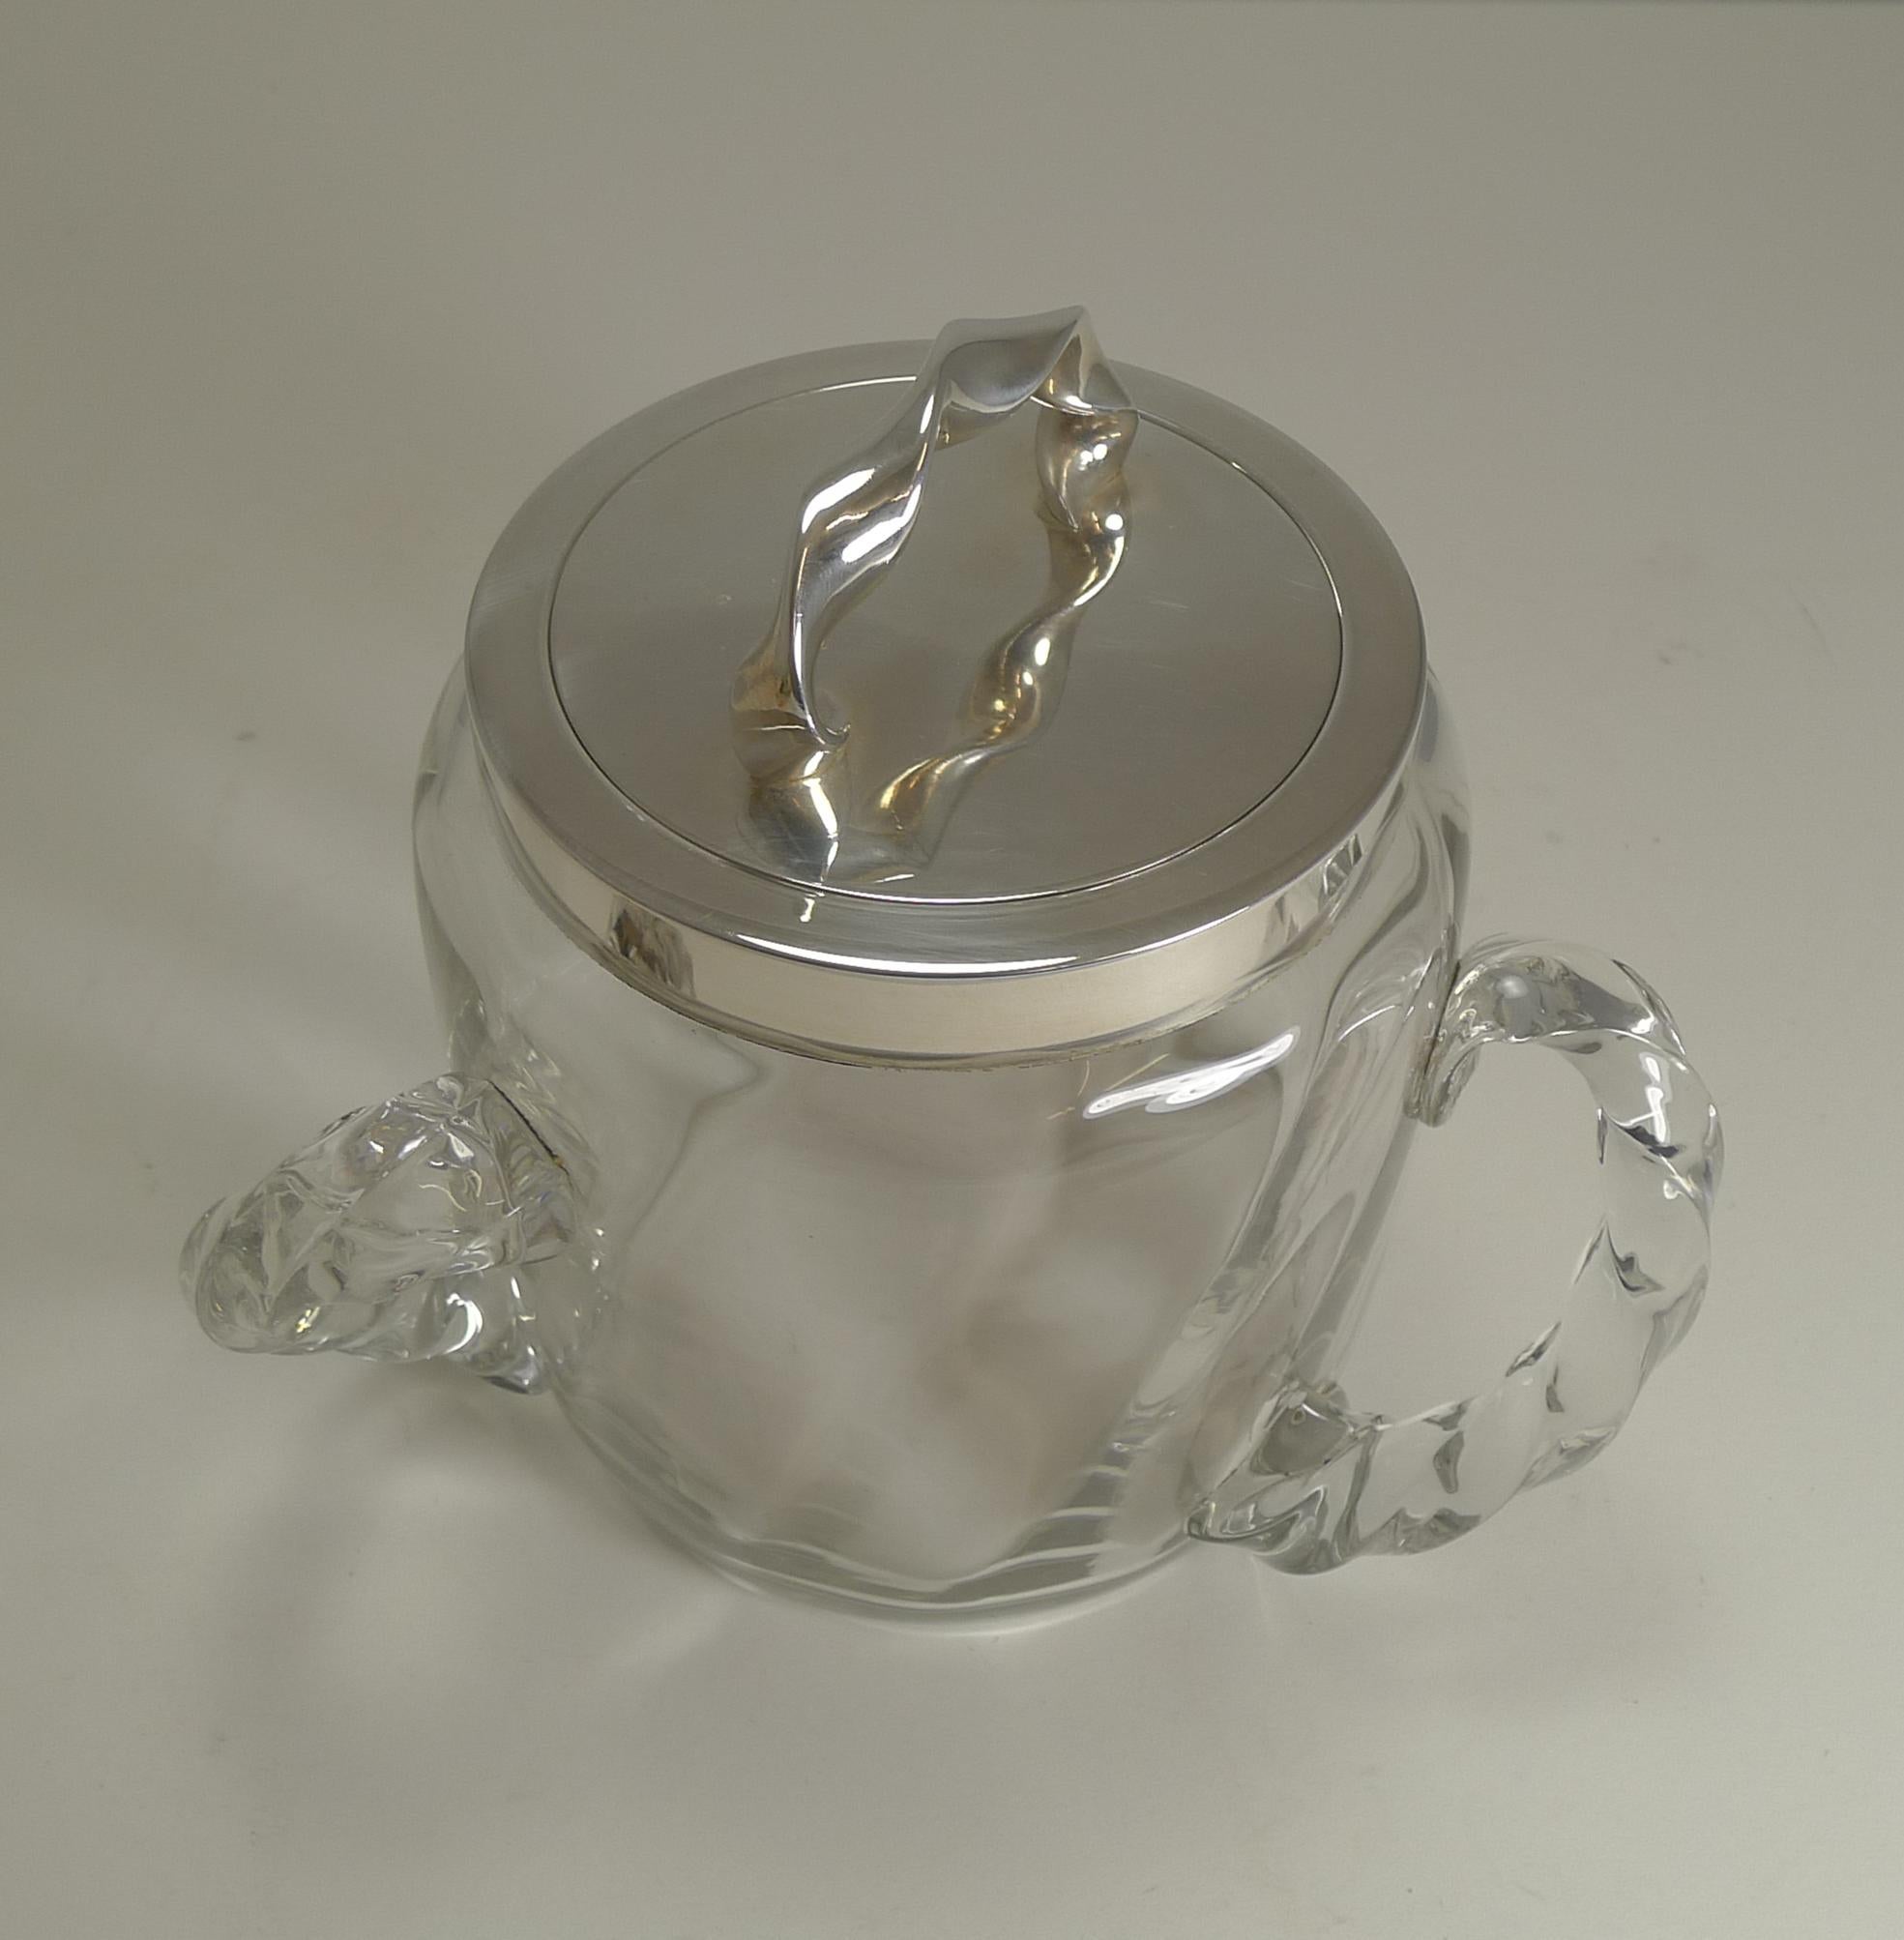 A really unusual biscuit box (it would make the most wonderful ice bucket too); made from glass and silver plate which is marked EPNS and 1/0 which I believe is made from the famous German maker, WMF (WÜRTTEMBERGISCHE METALLWARENFABRIK), and would